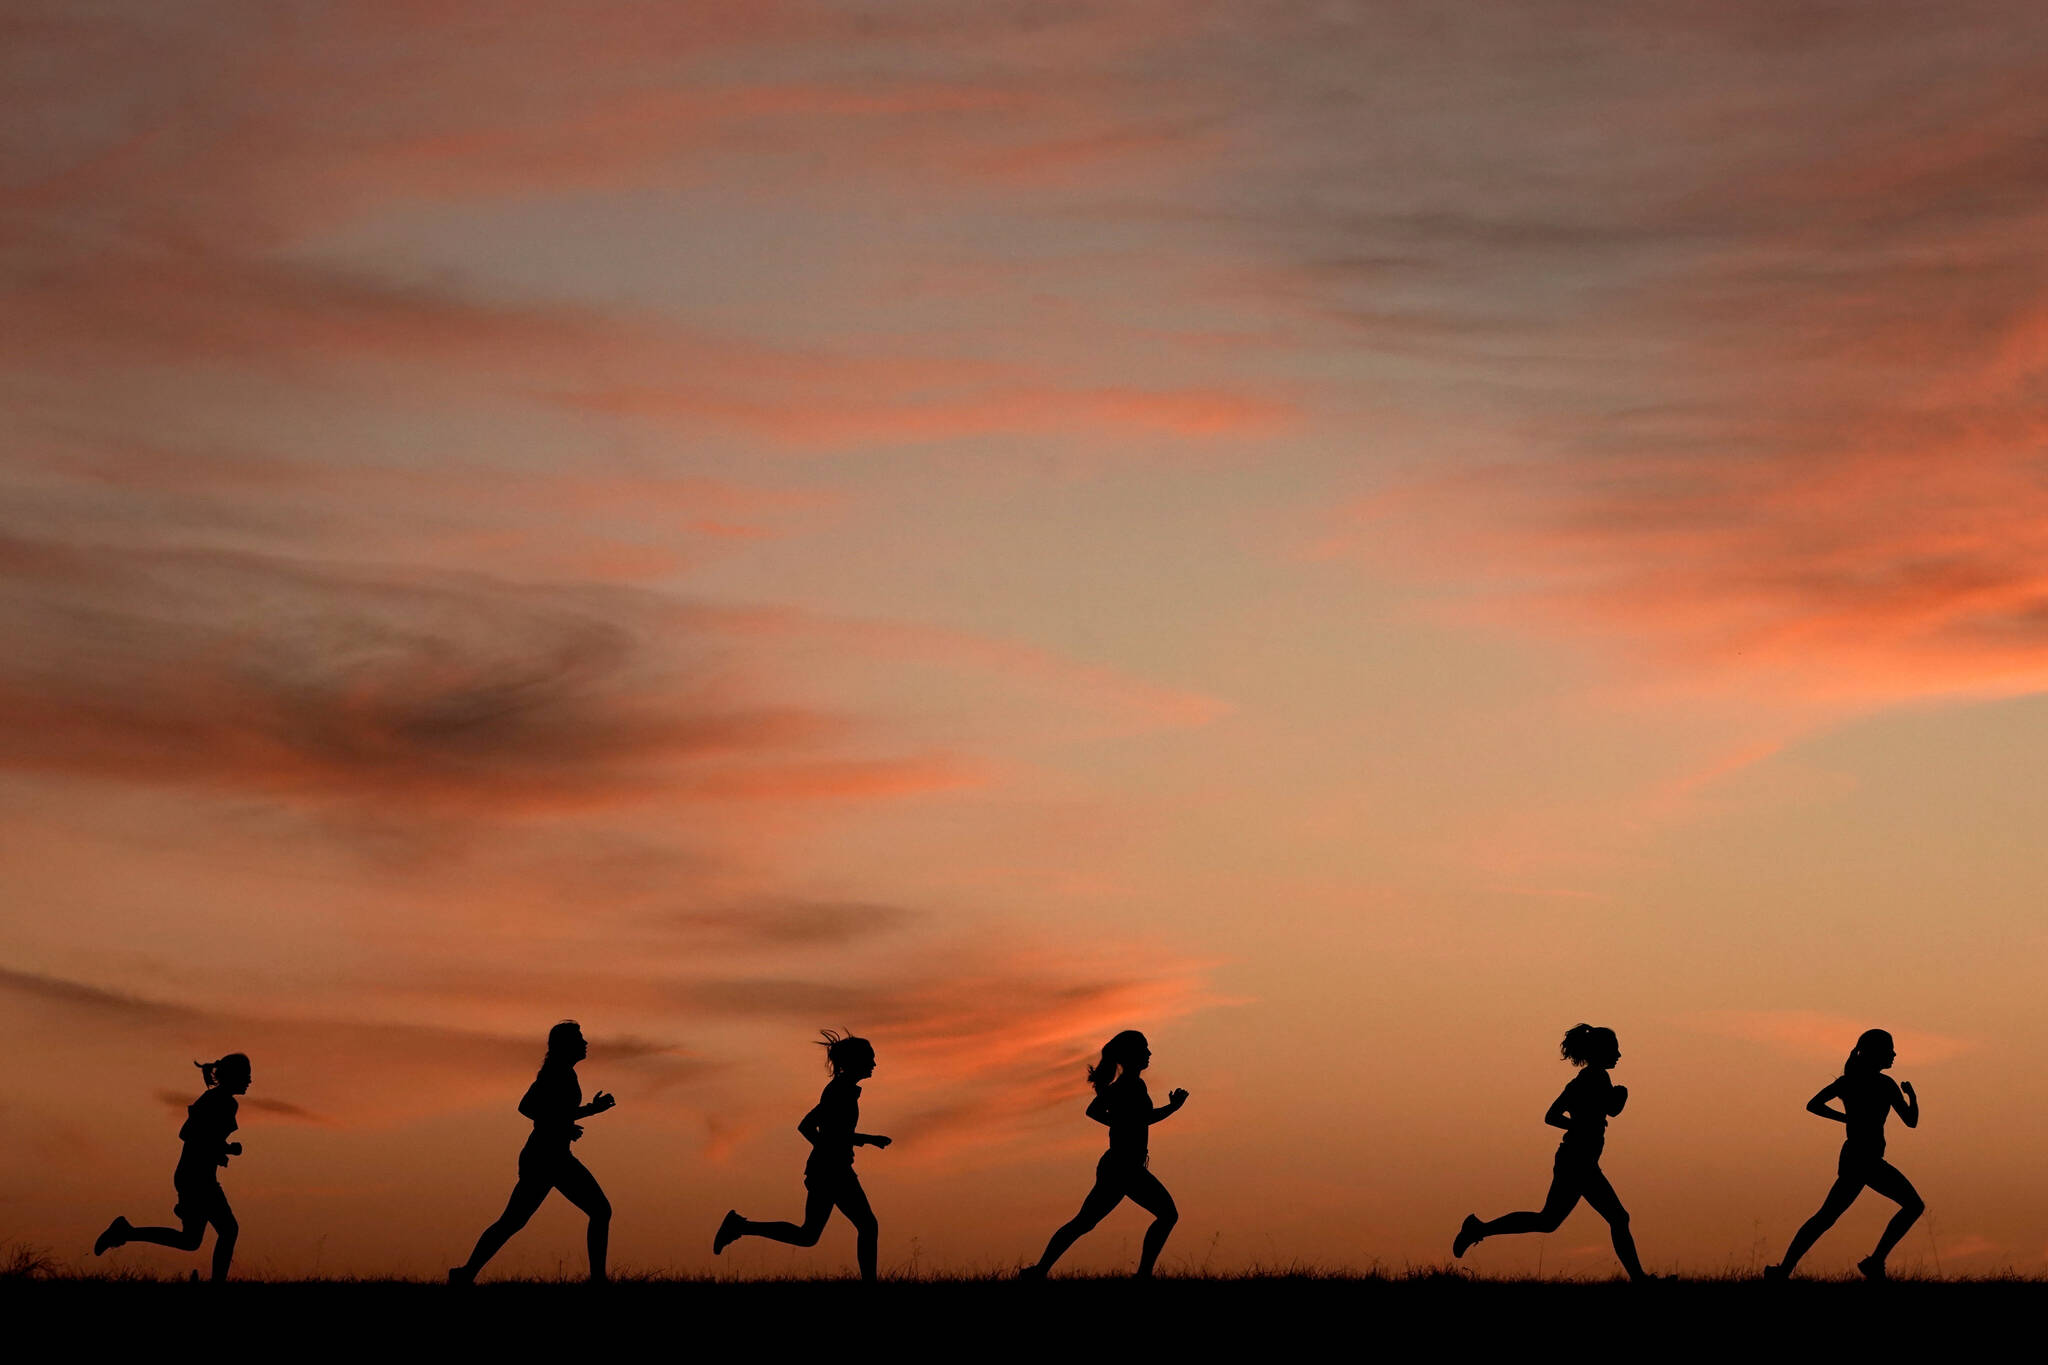 High school students run at sunset as they practice for the track and field season Monday, Feb. 28, 2022, in Shawnee, Kan. New research hints that even simple exercise just might help fend off memory problems. While physical activity helps keep healthy brains fit, it’s not clear how much it helps once memory starts to slide. (AP Photo / Charlie Riedel)